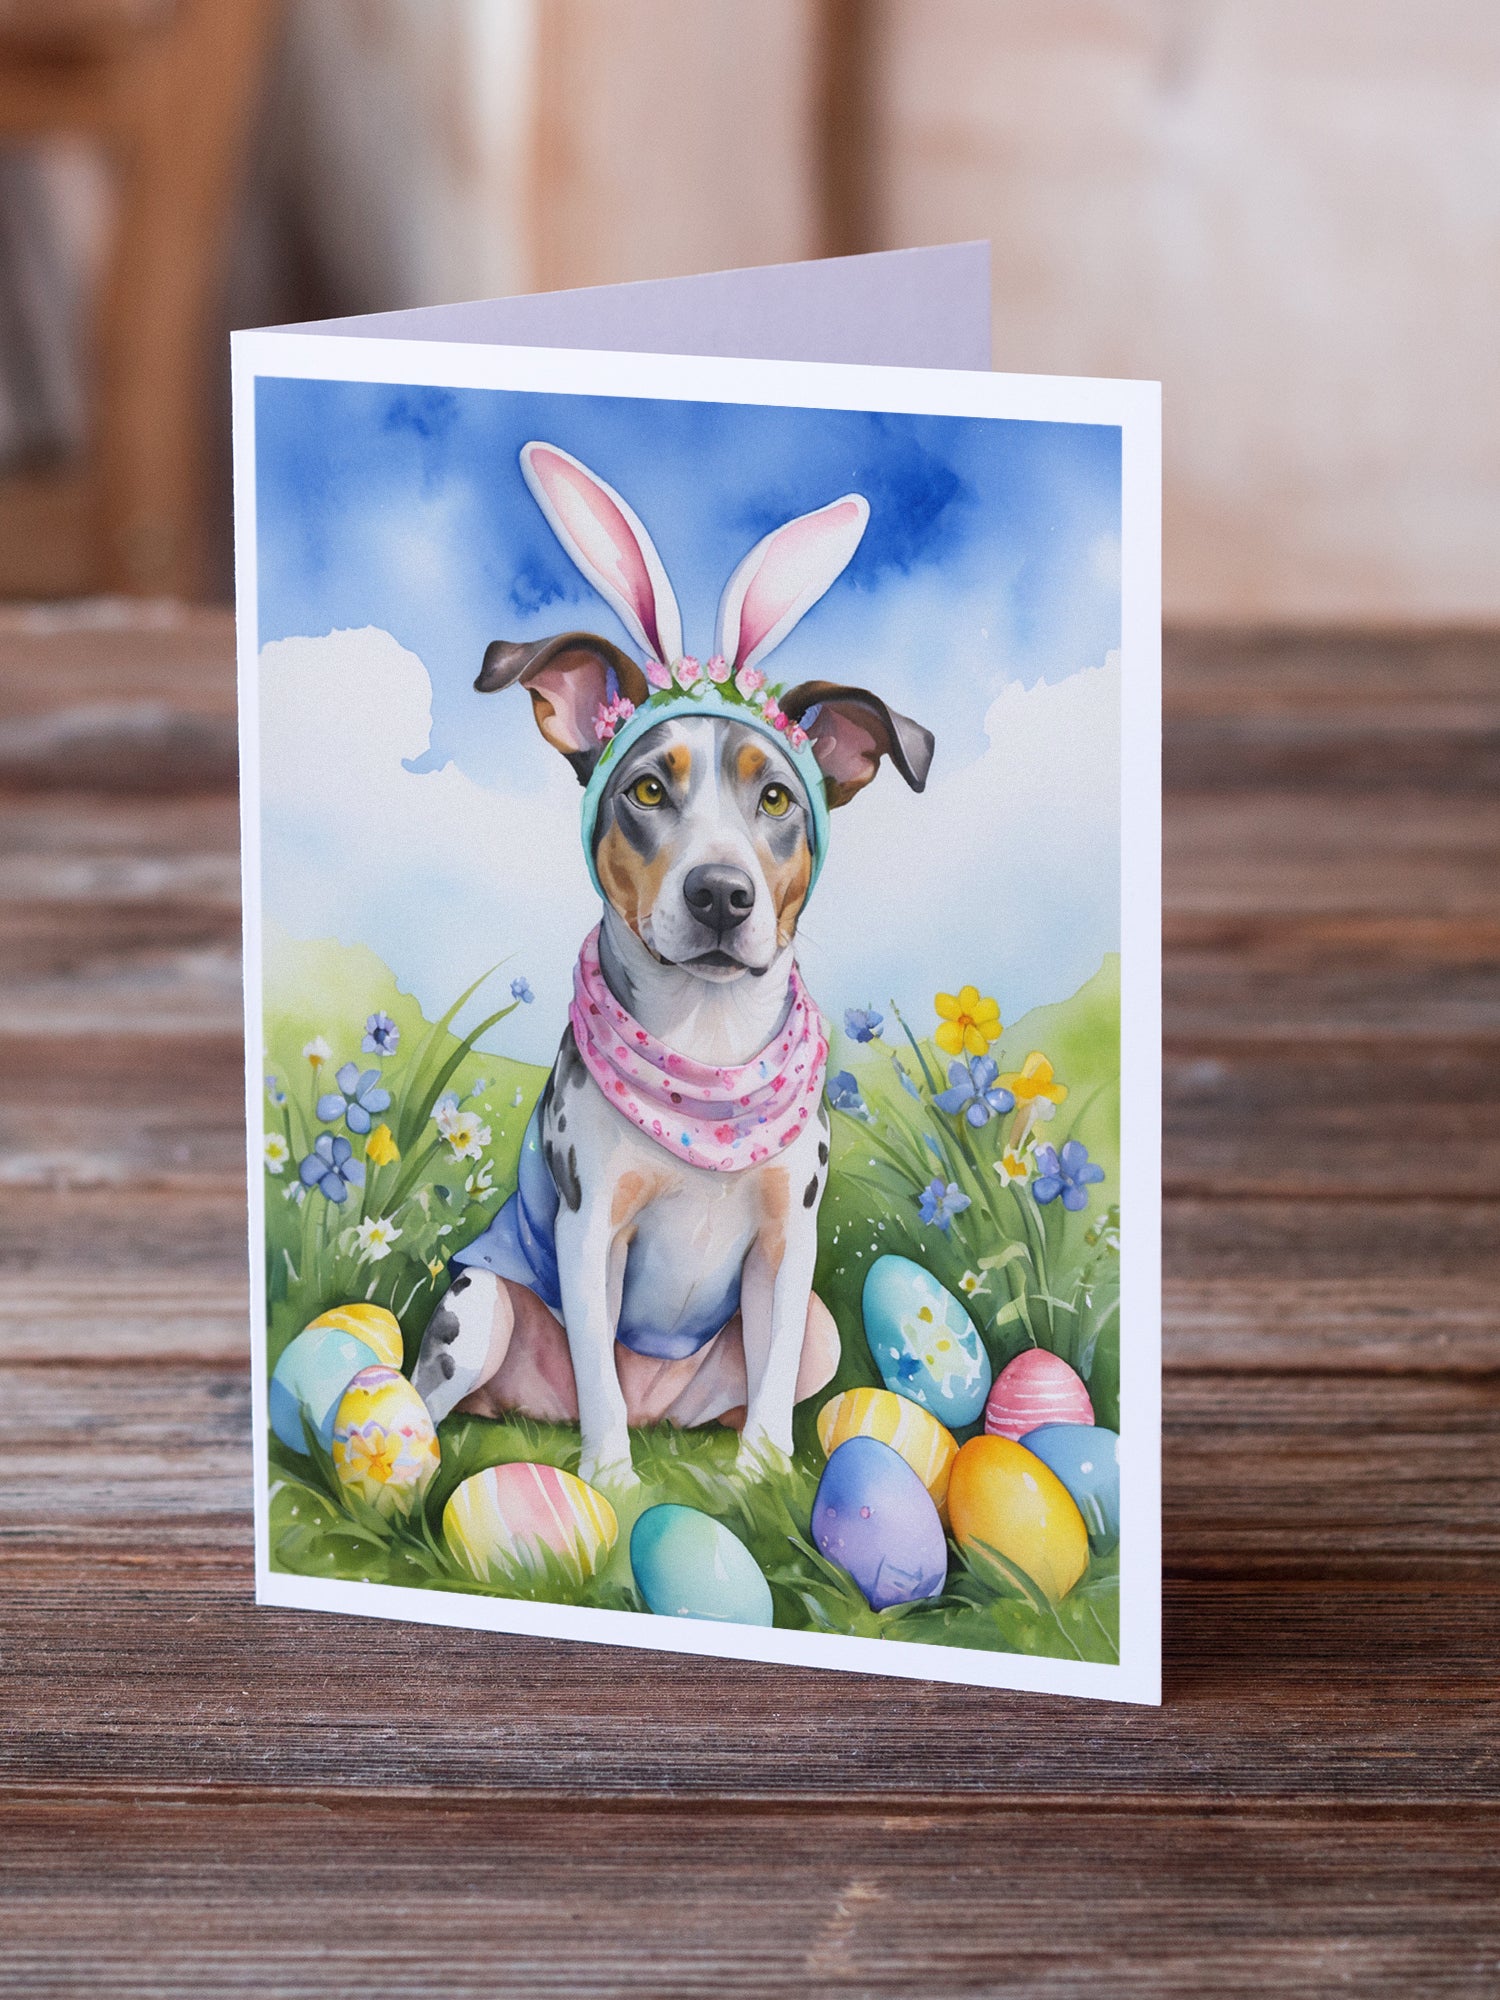 Catahoula Easter Egg Hunt Greeting Cards Pack of 8